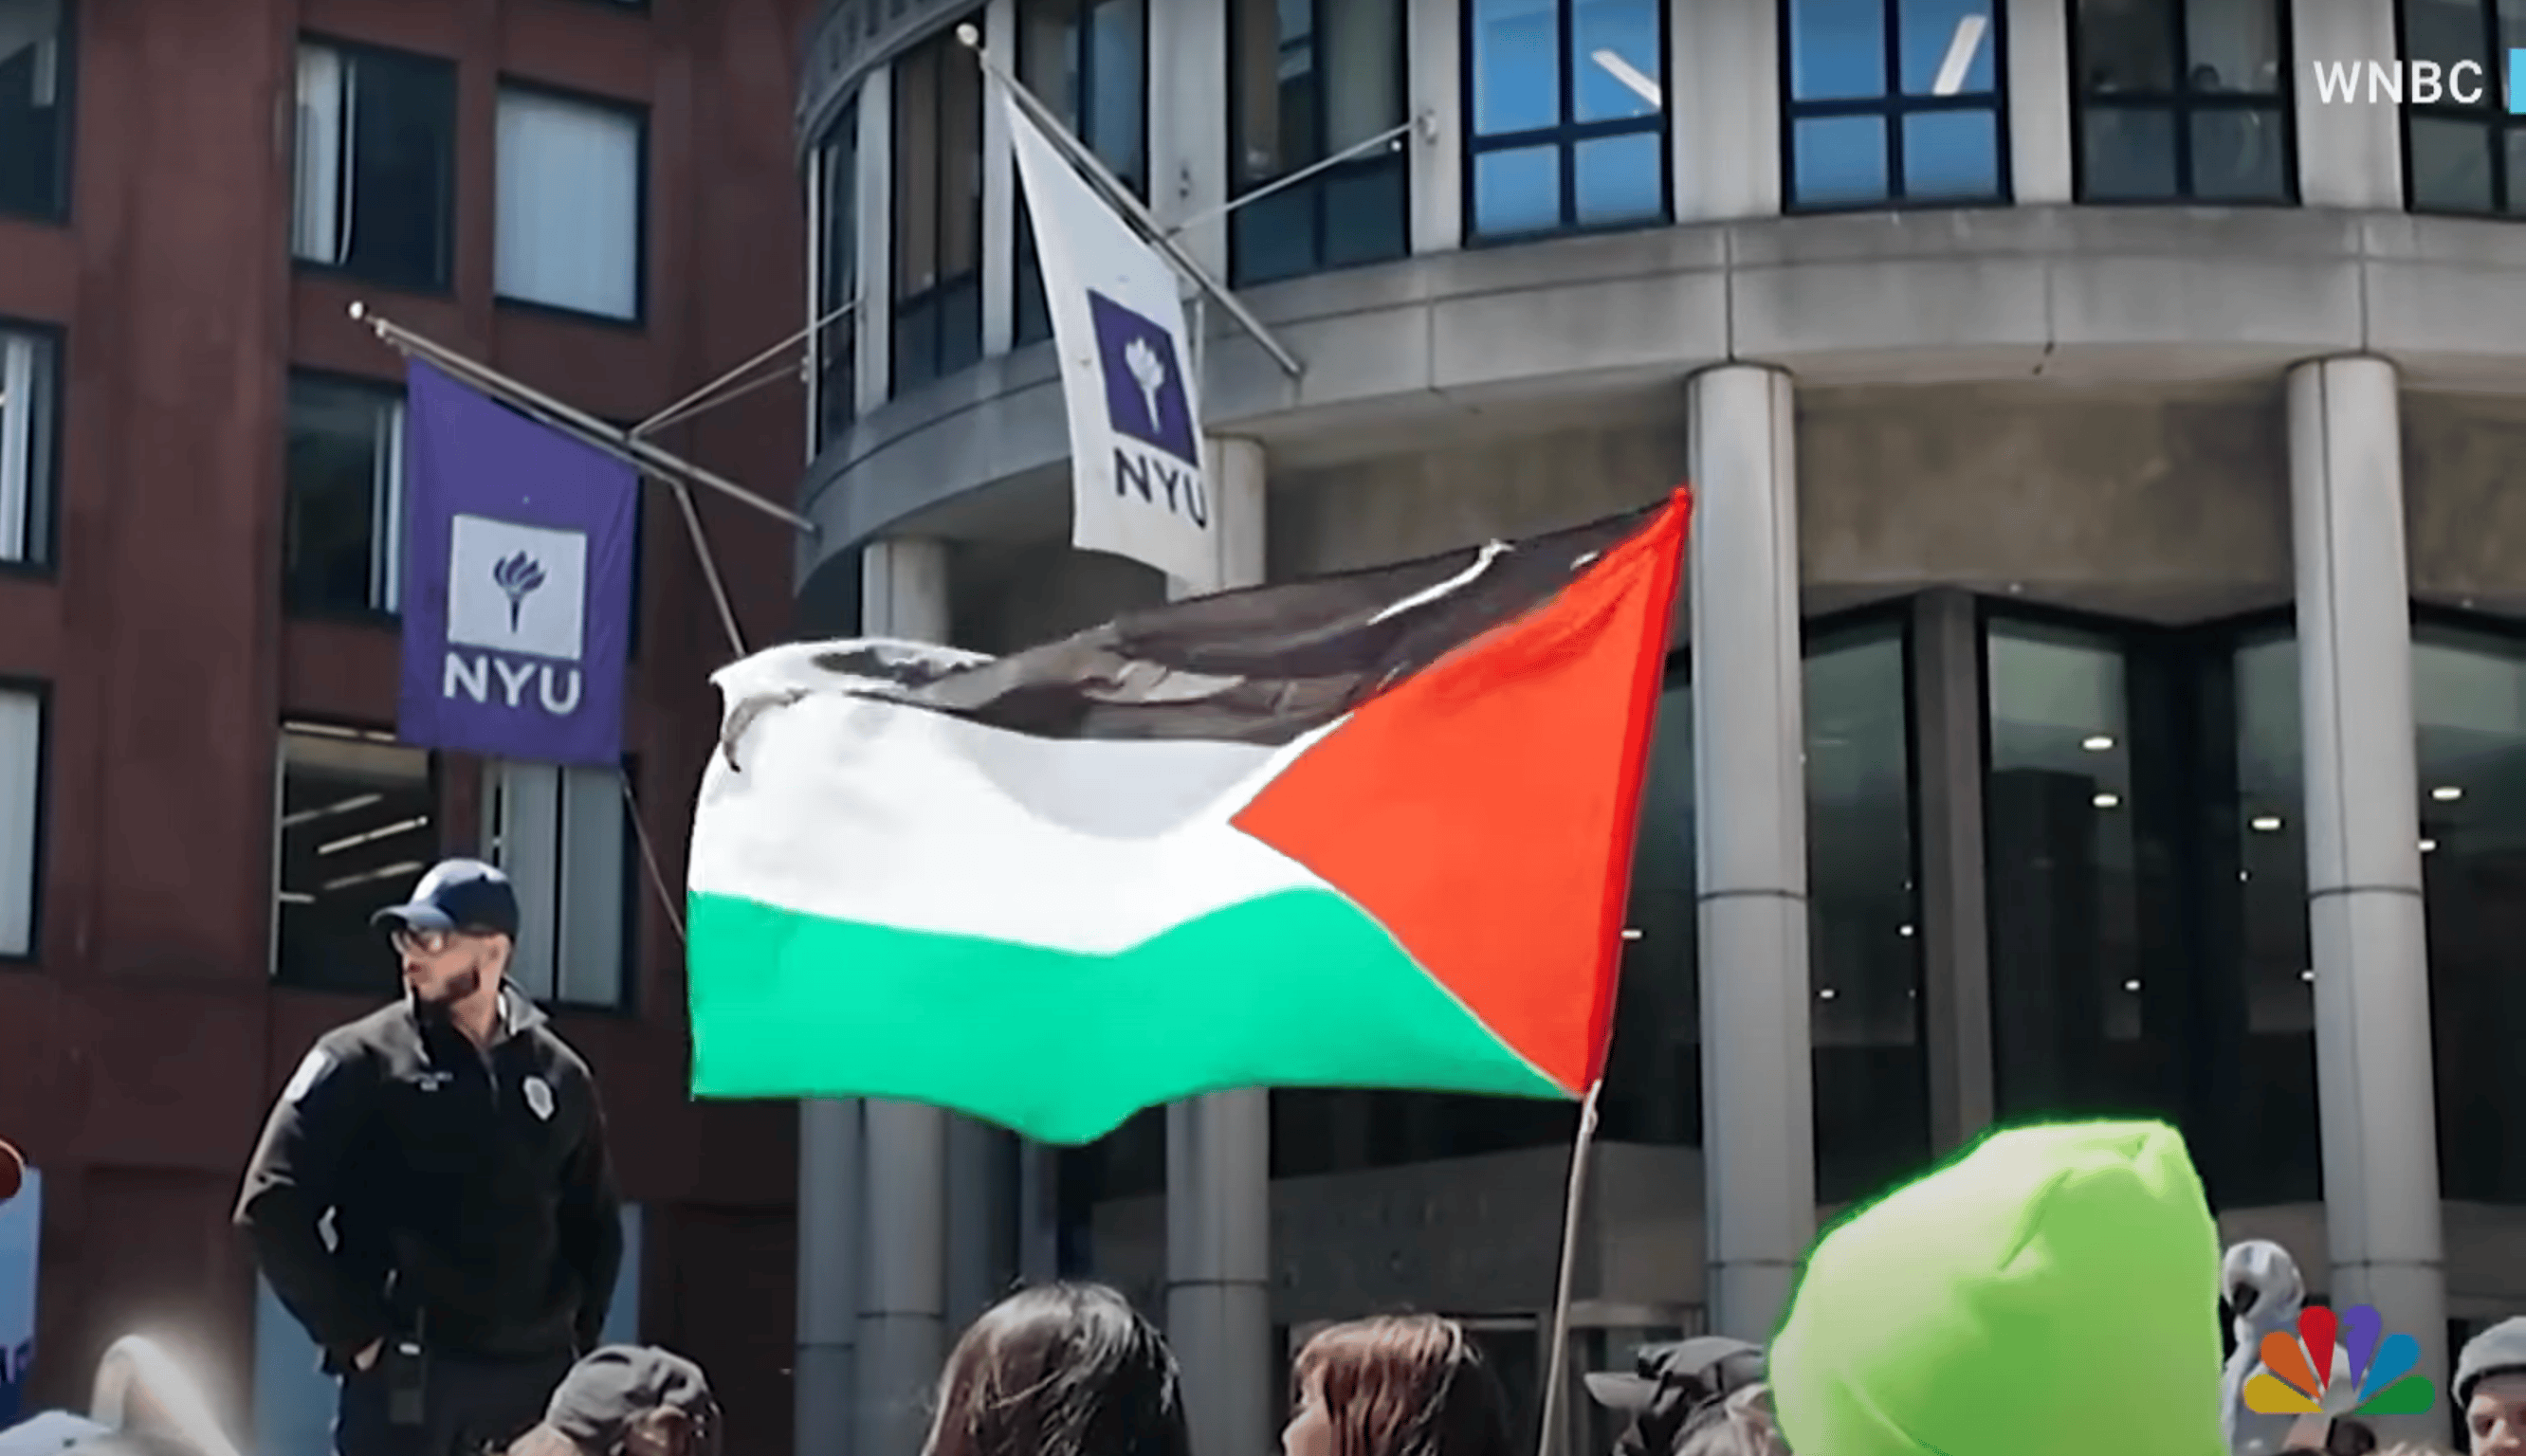 A Palestinian flag waves in front of flags for NYU